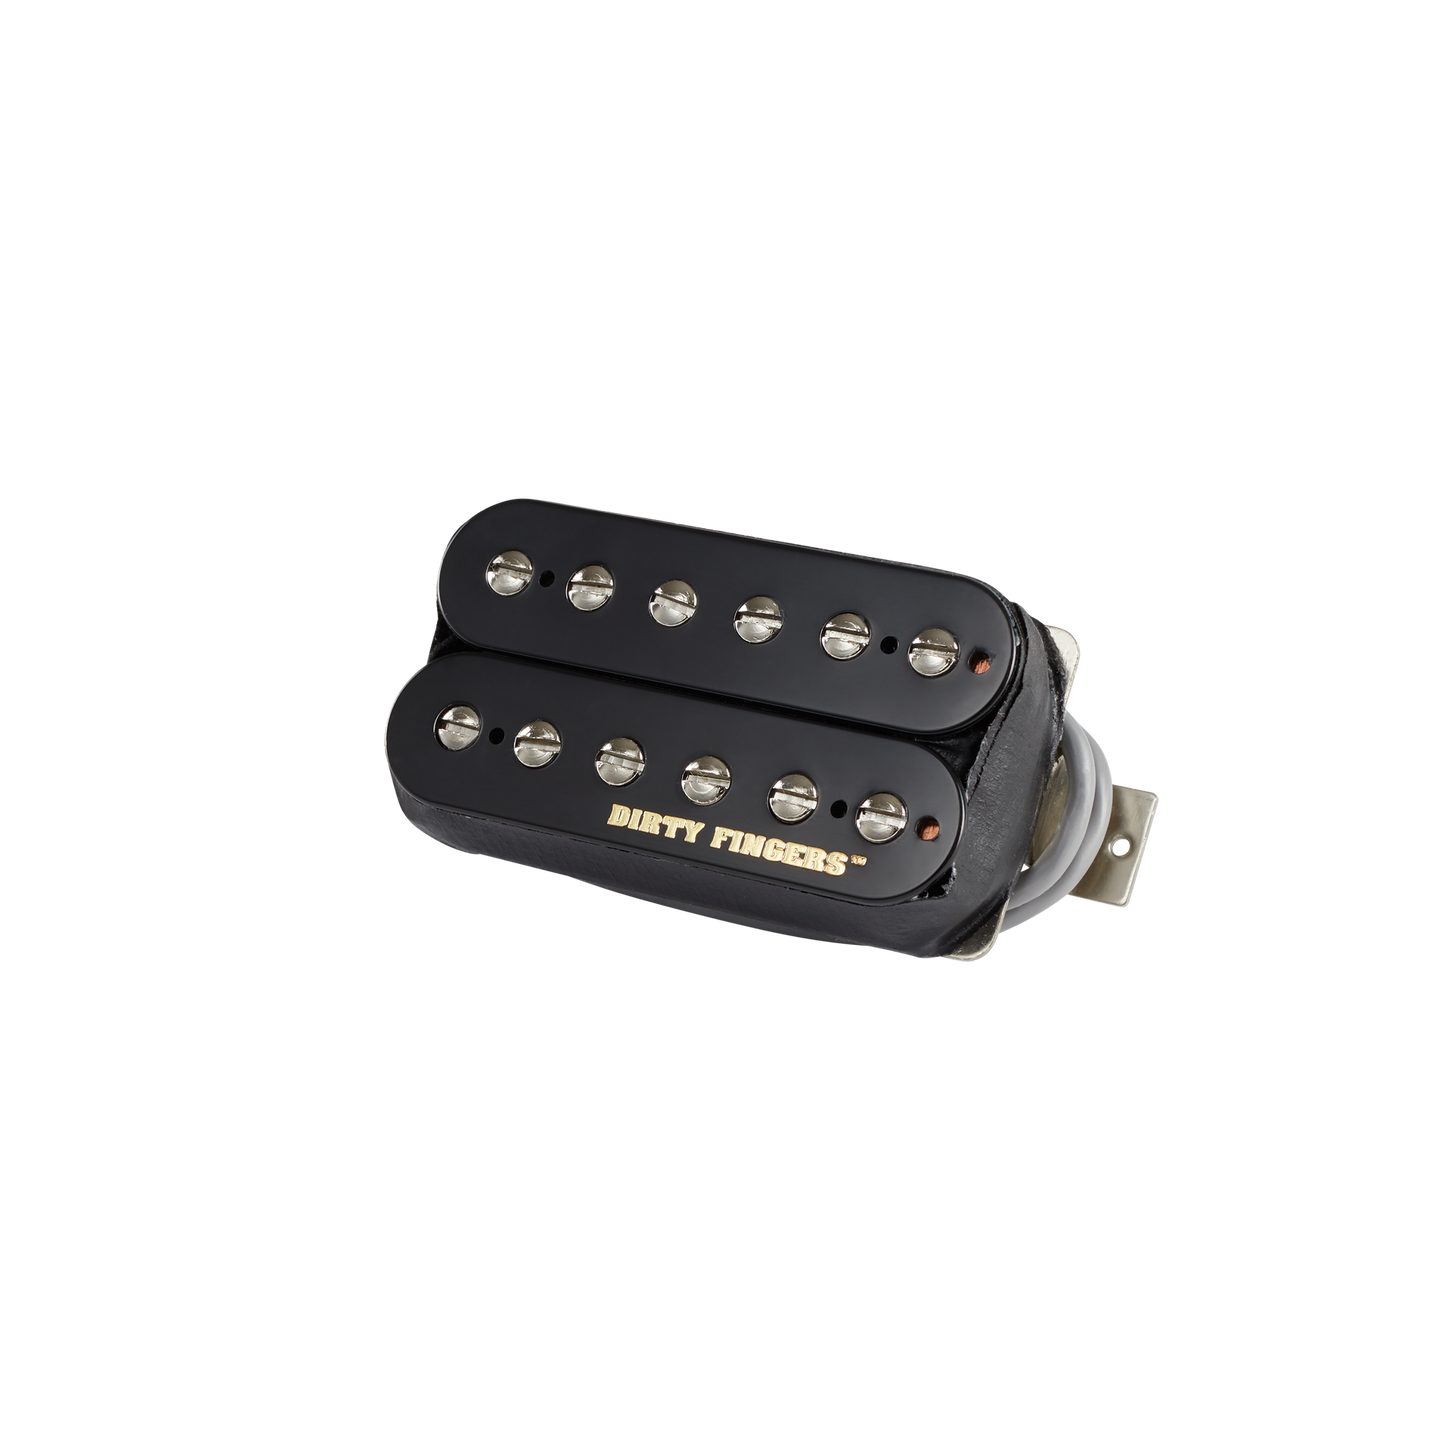 Gibson Dirty Fingers SM Double Black 4-conductor Potted 15k Ceramic 8 Pickup